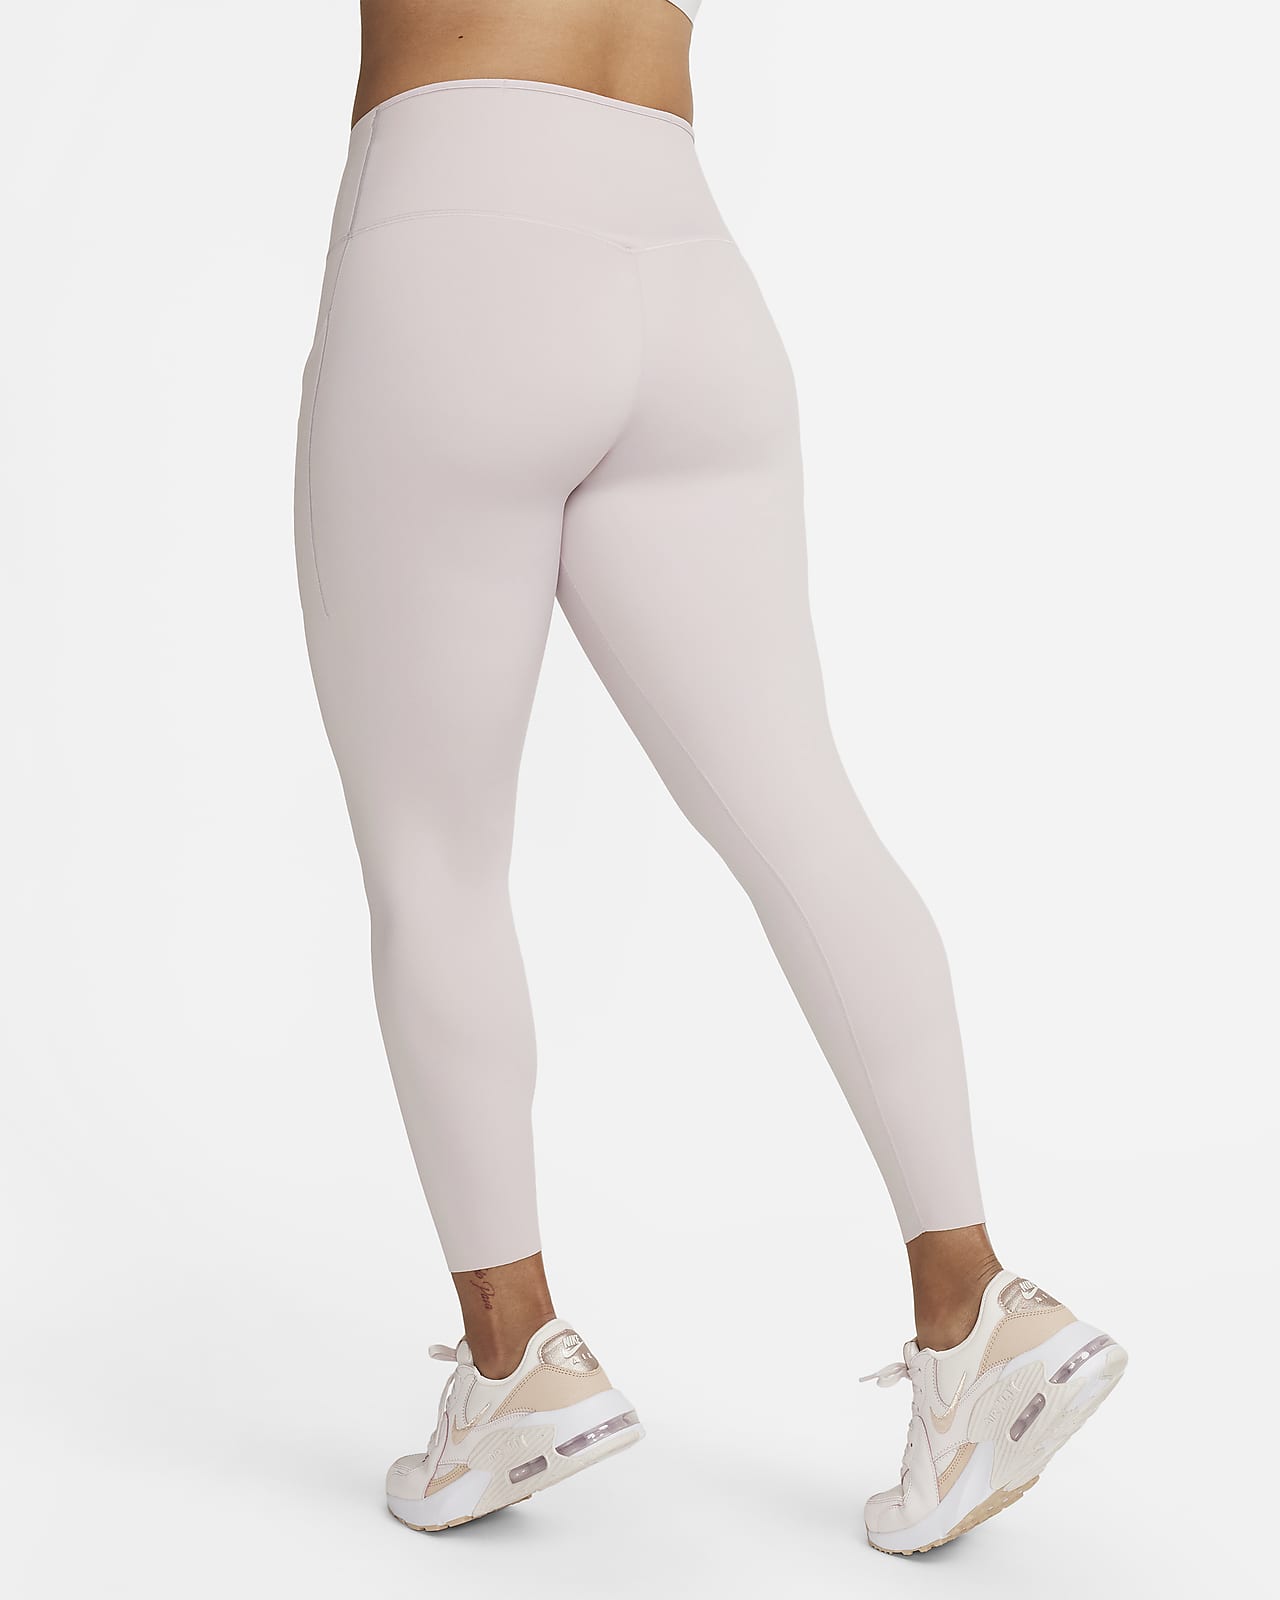 Therma-FIT One 7/8 legging, Nike, Running Bottoms